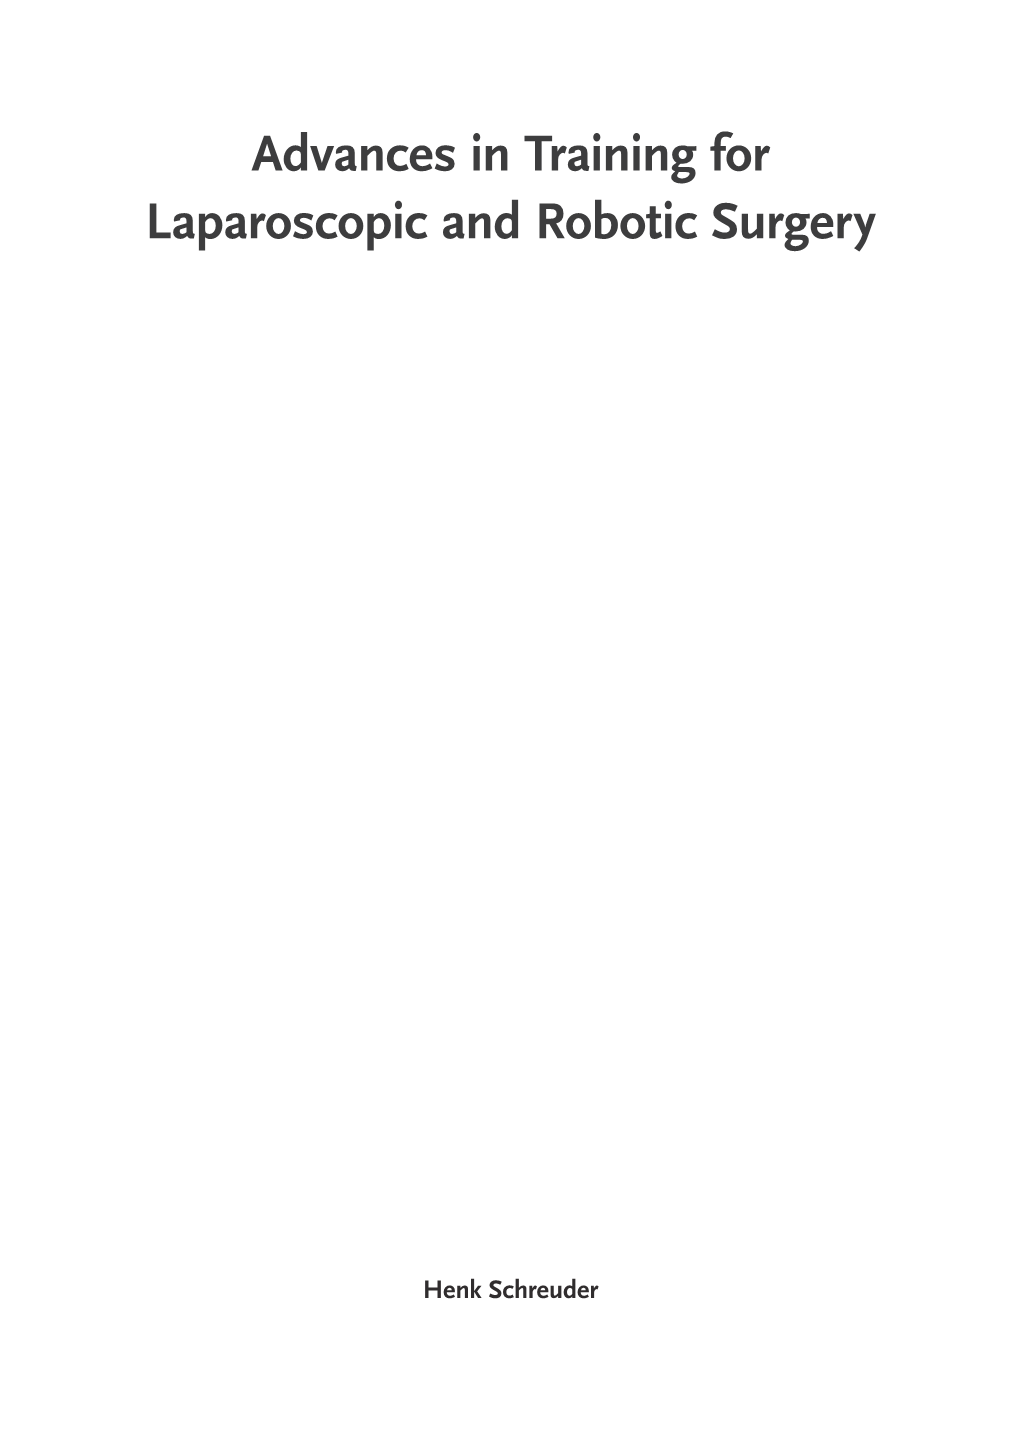 Advances in Training for Laparoscopic and Robotic Surgery